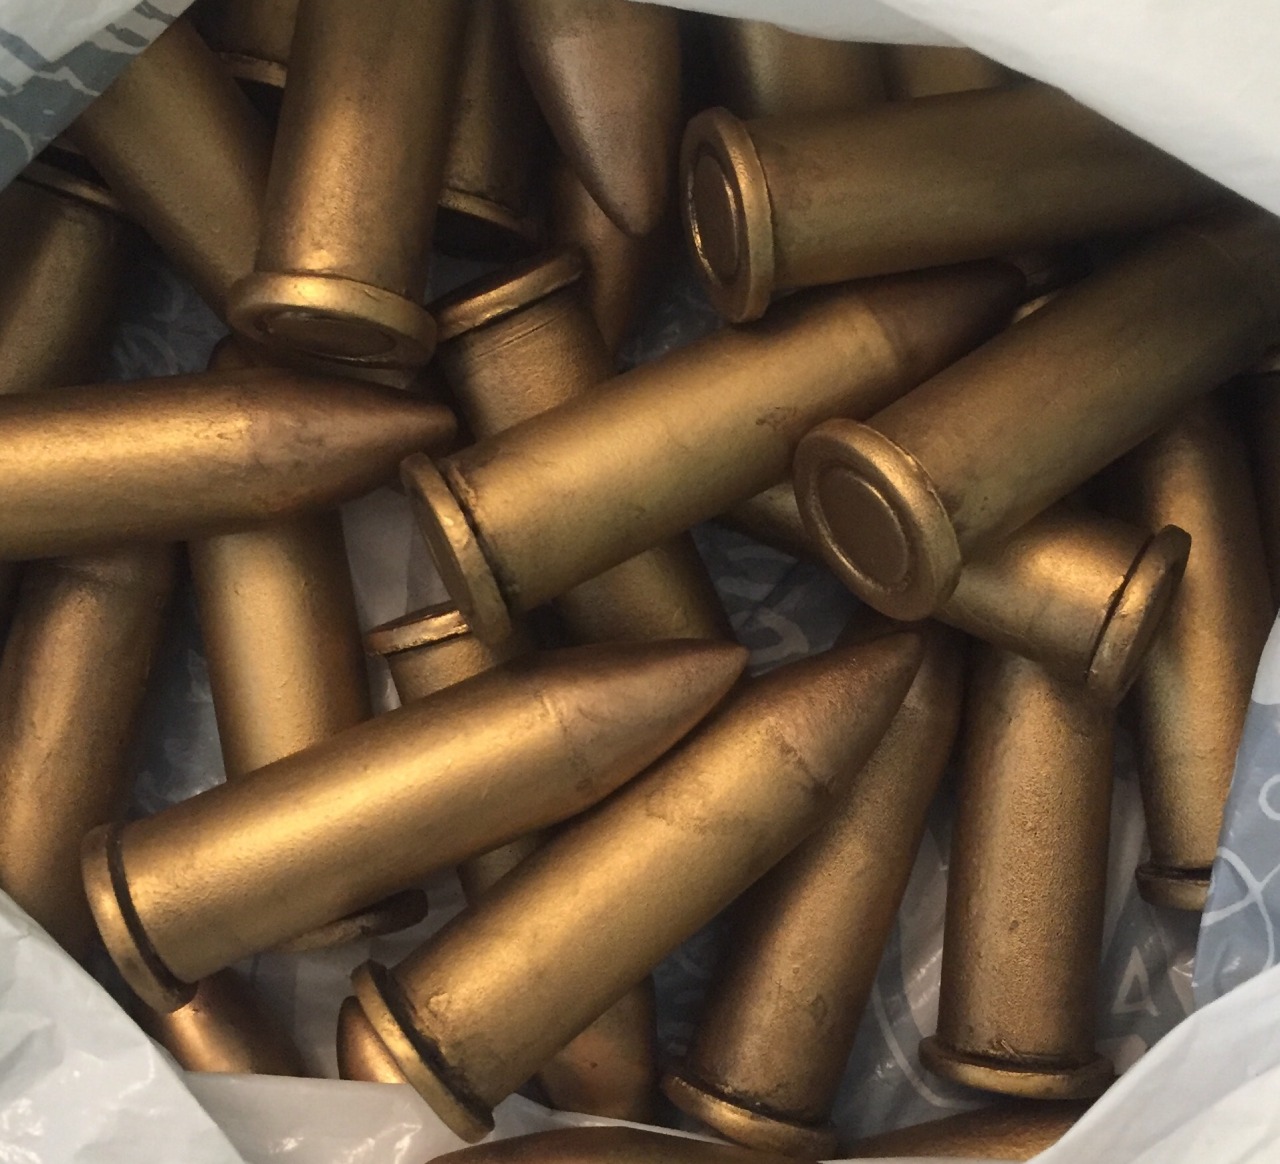 Project Cosplay — belledecam: How to Make Fake Bullets (Without